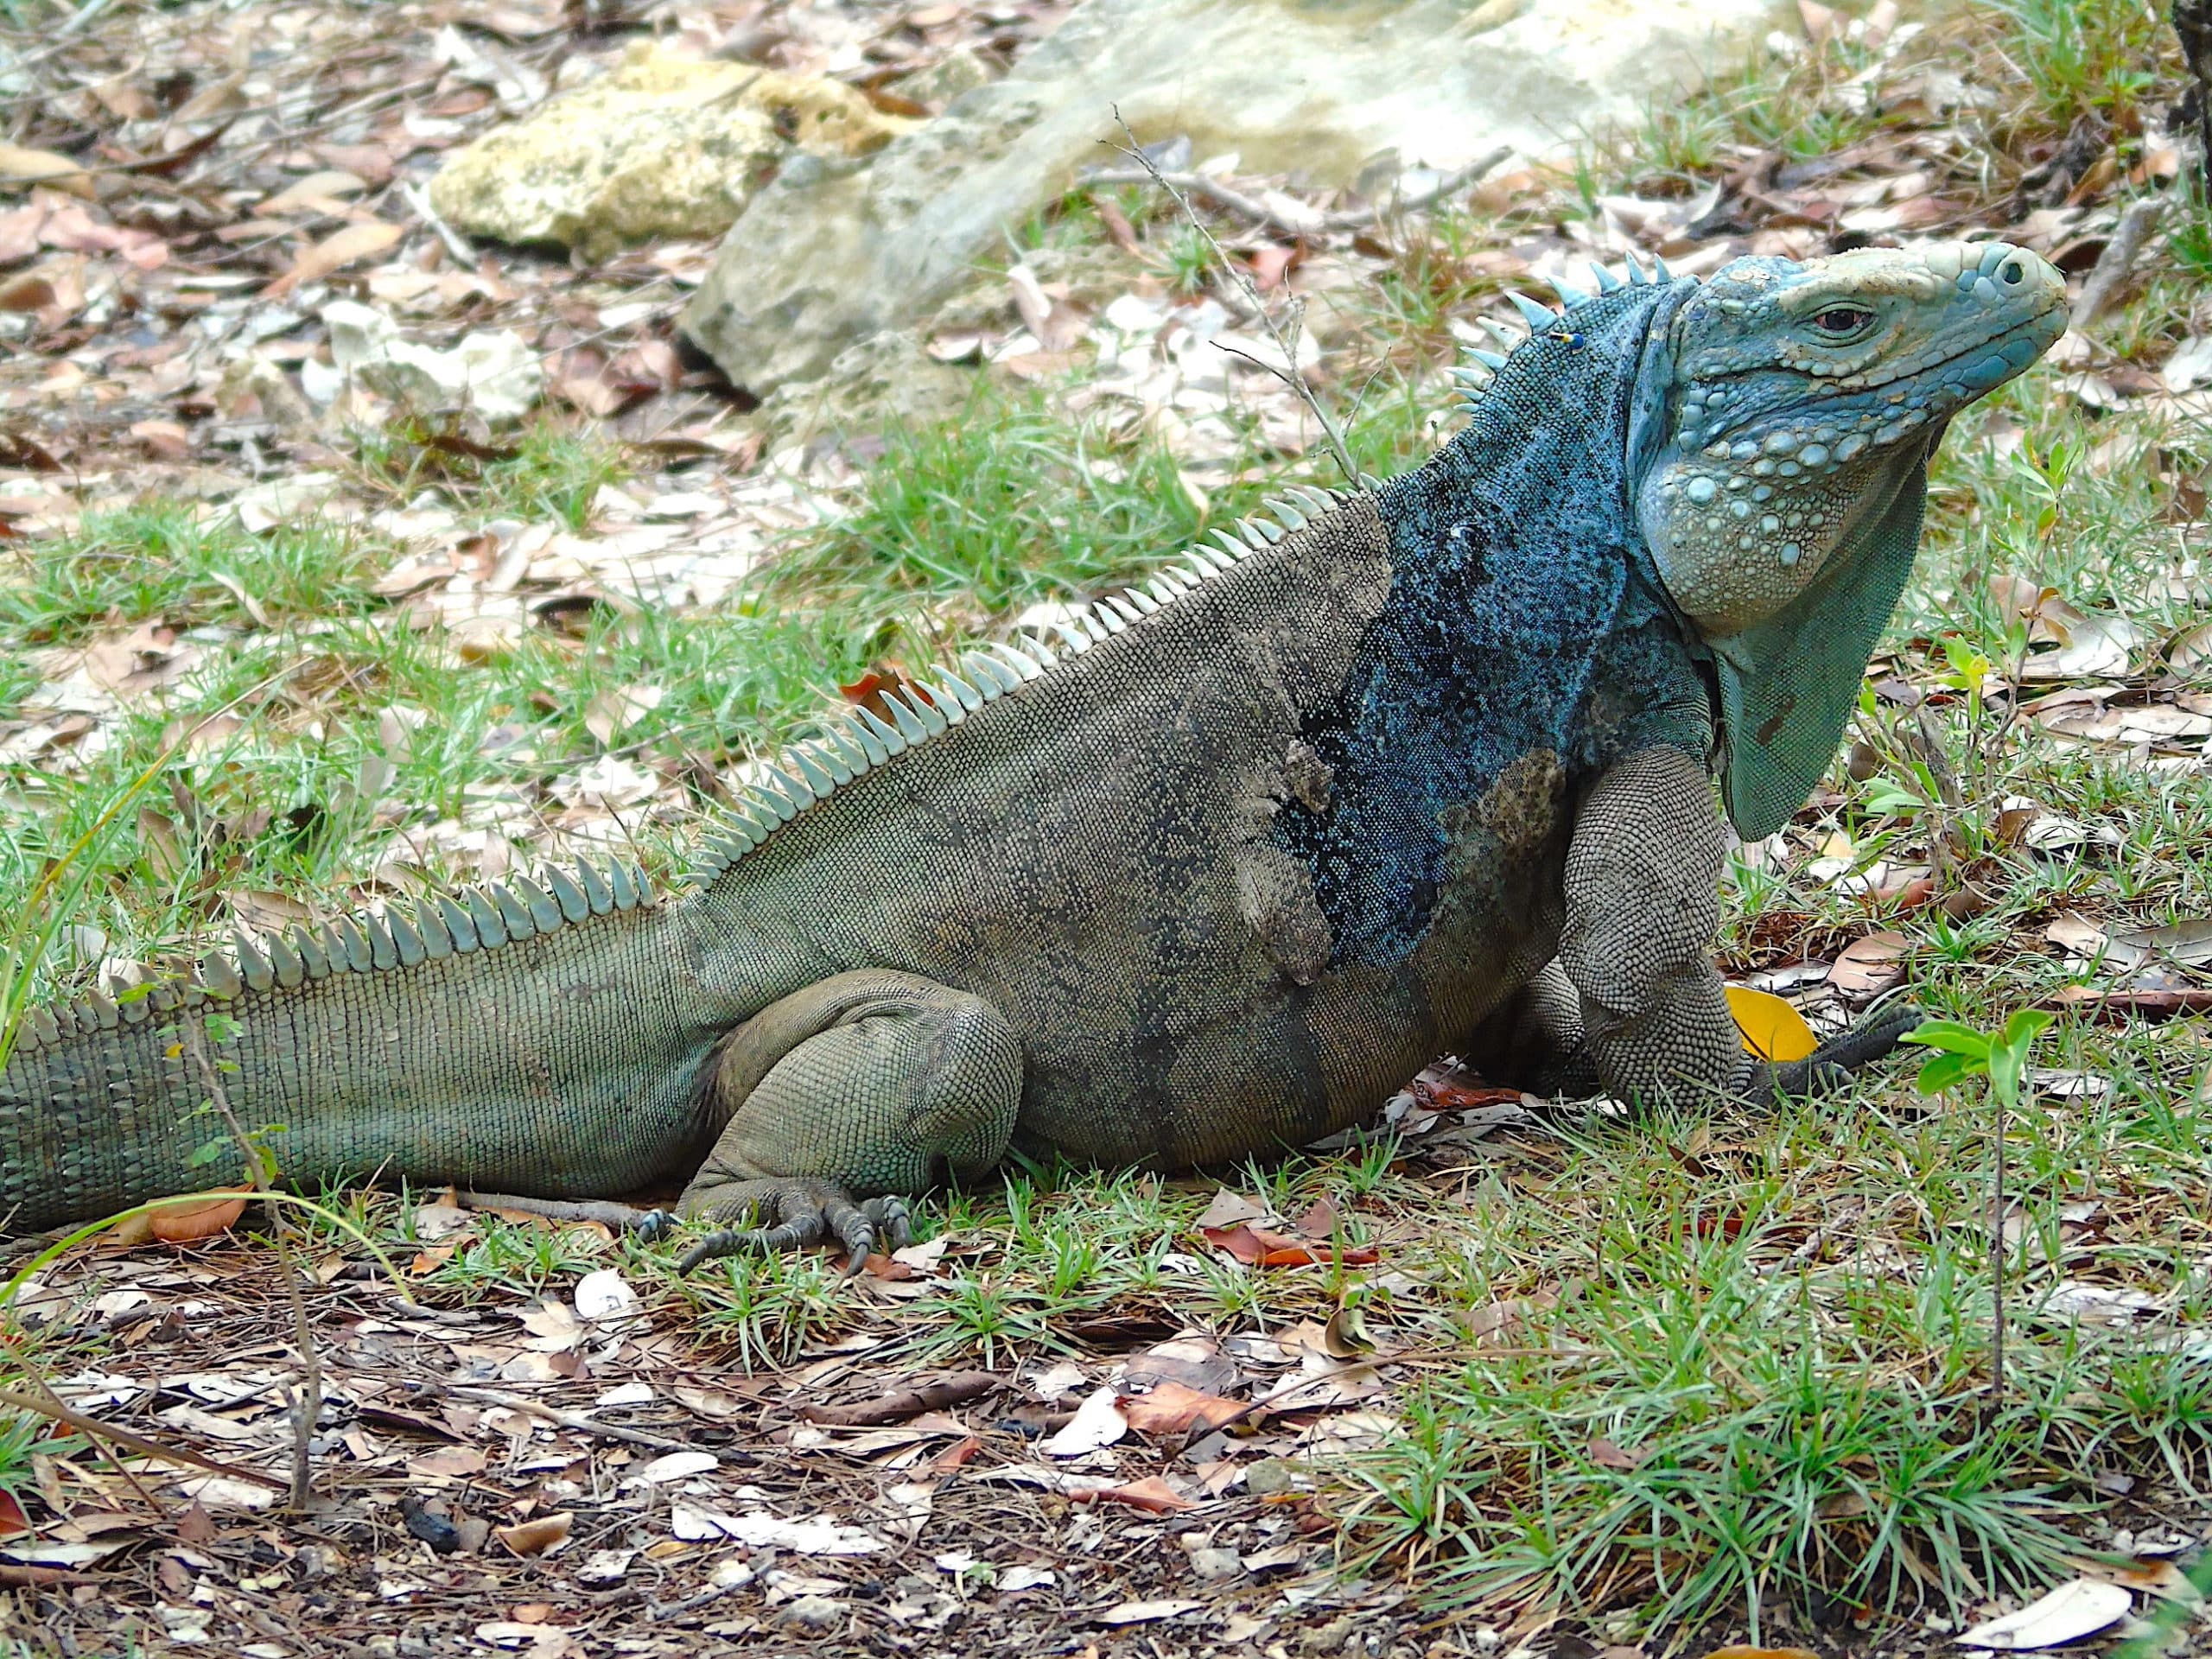 Grand Cayman is home to an extremely striking and charismatic lizard, the blue iguana (Cyclura lewisi)